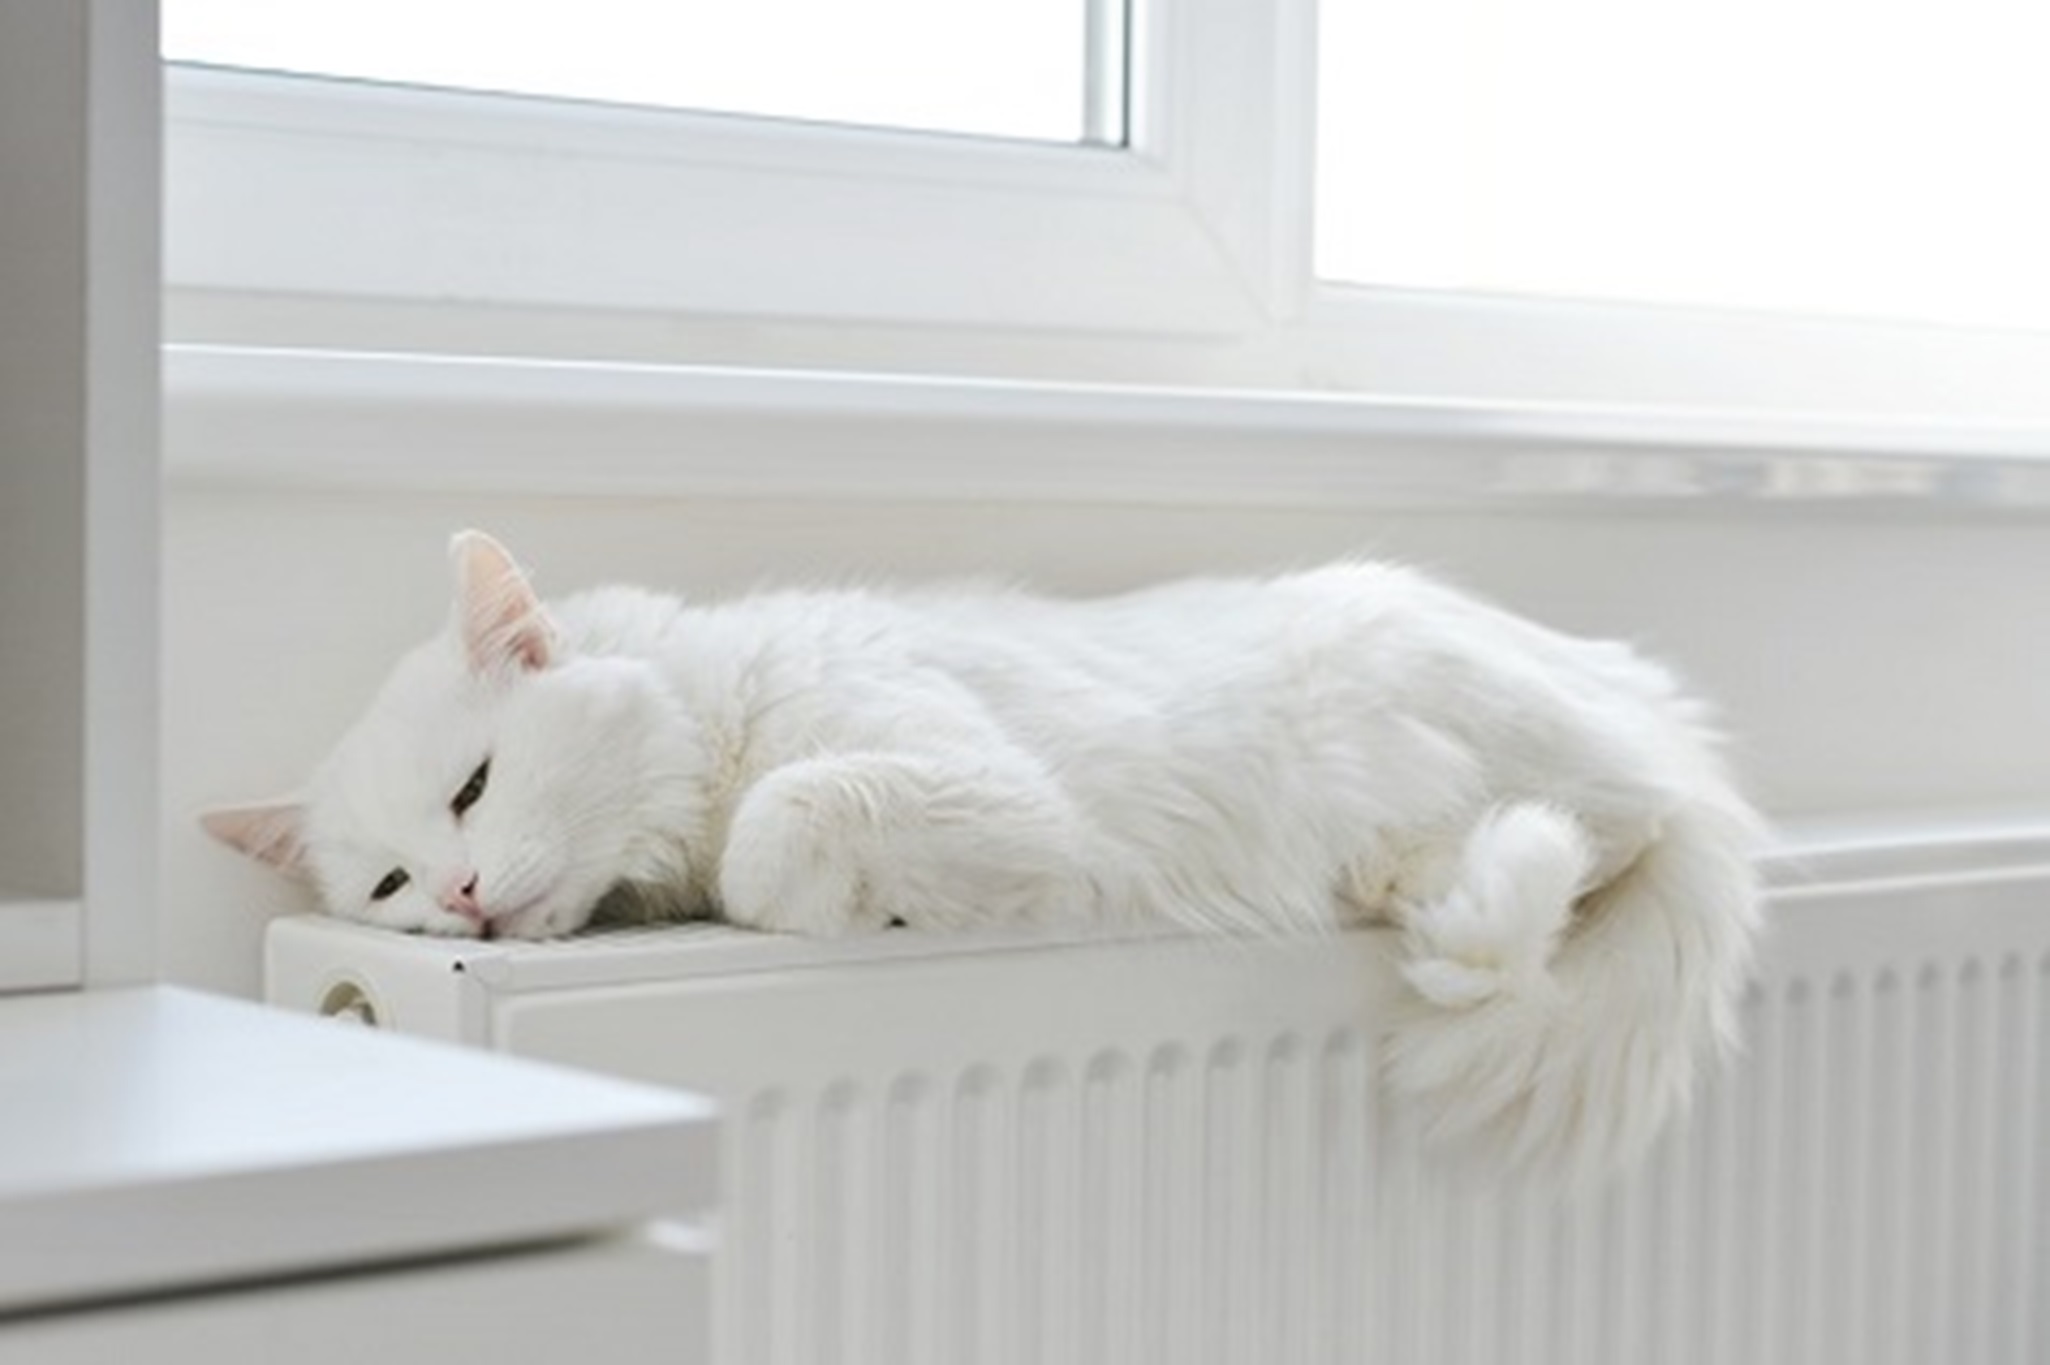 Is the end of the radiator near?